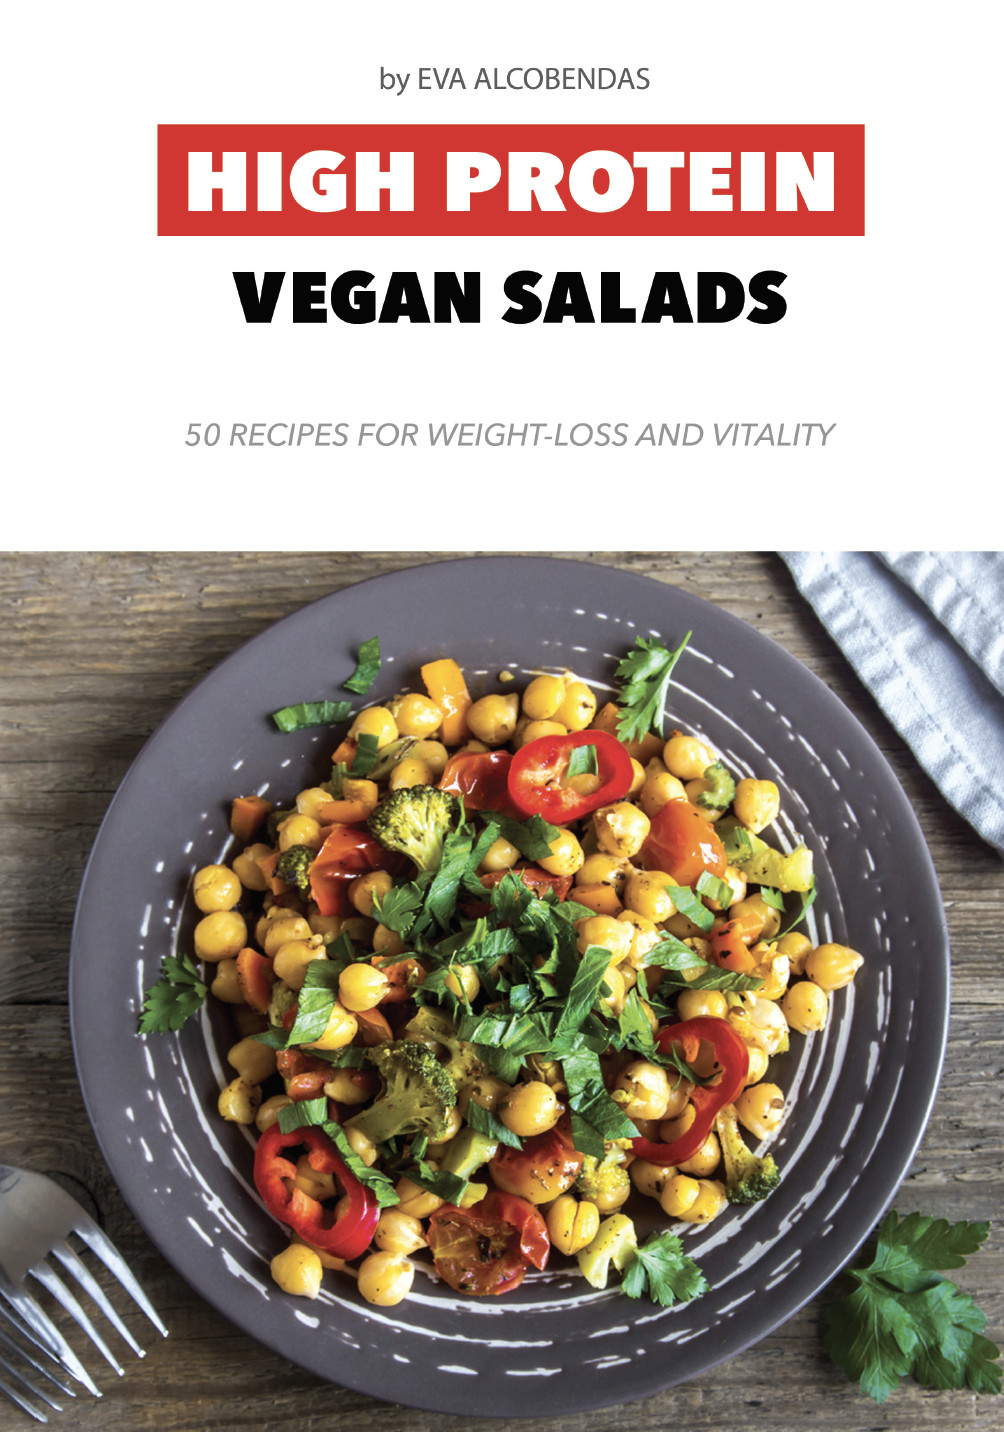 High Protein Vegetarian Salad
 High Protein Vegan Salads 50 Recipes for Weight Loss and